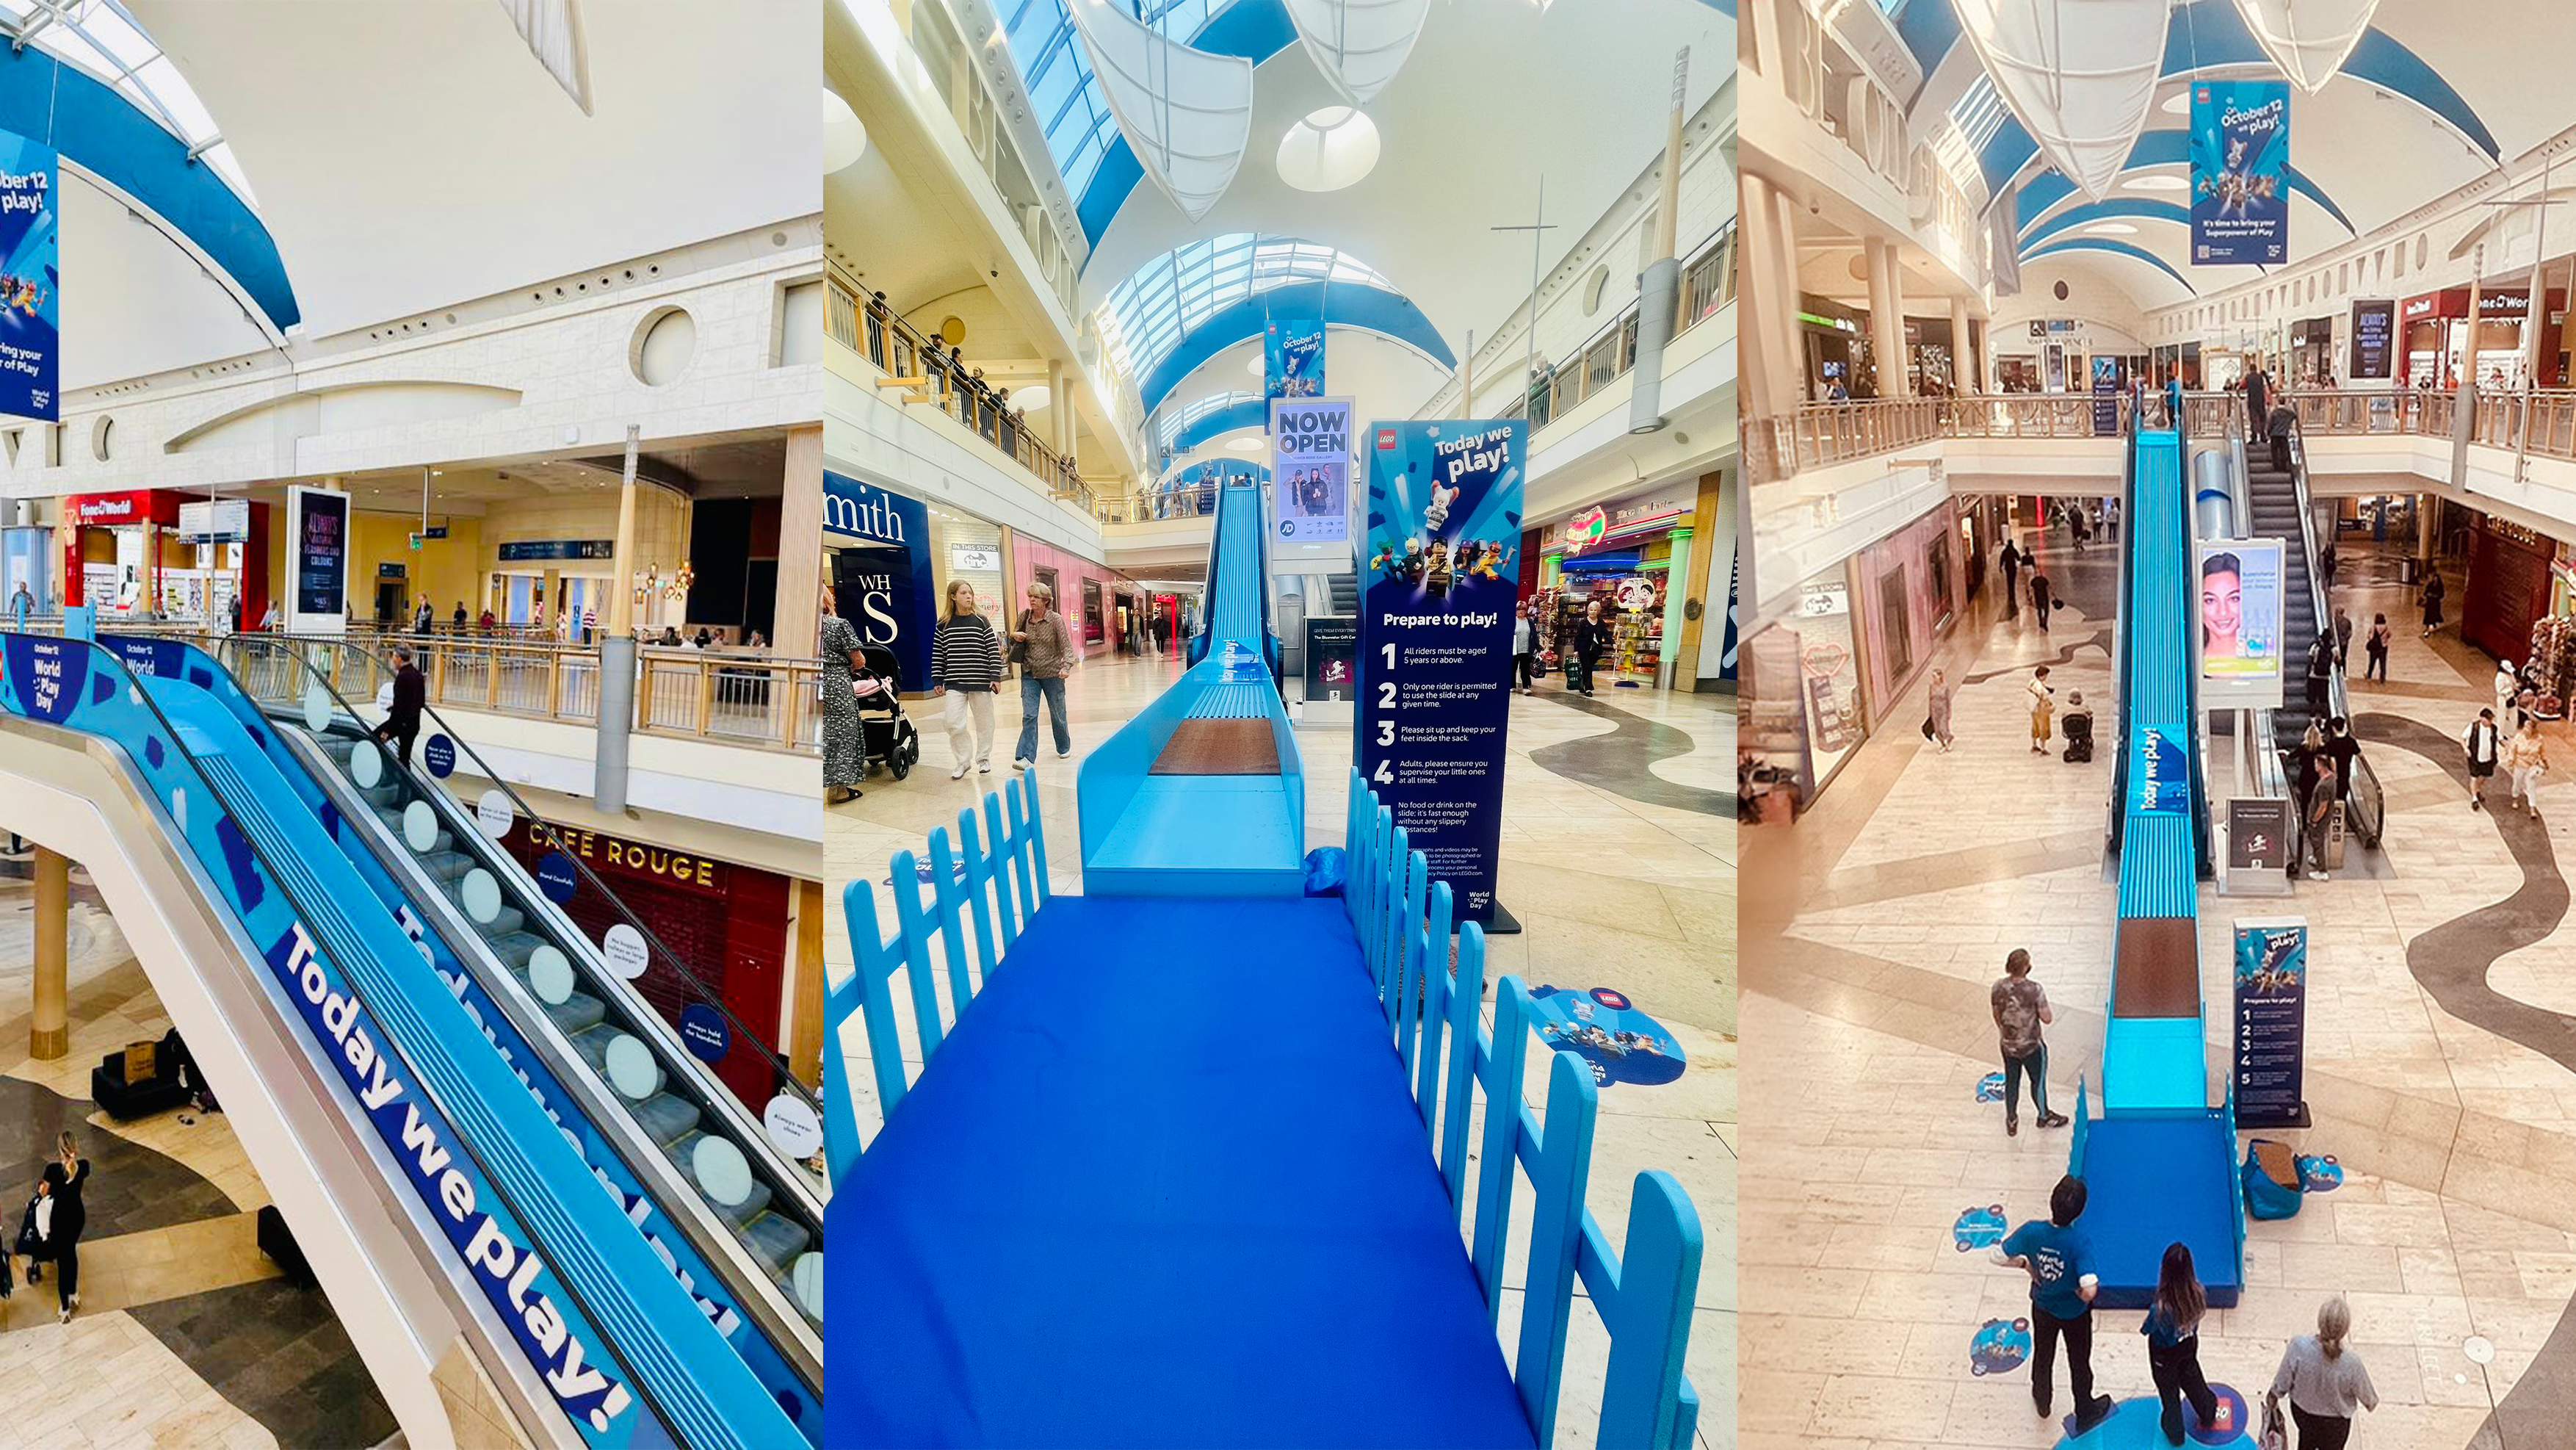 Slide experience in a shopping centre